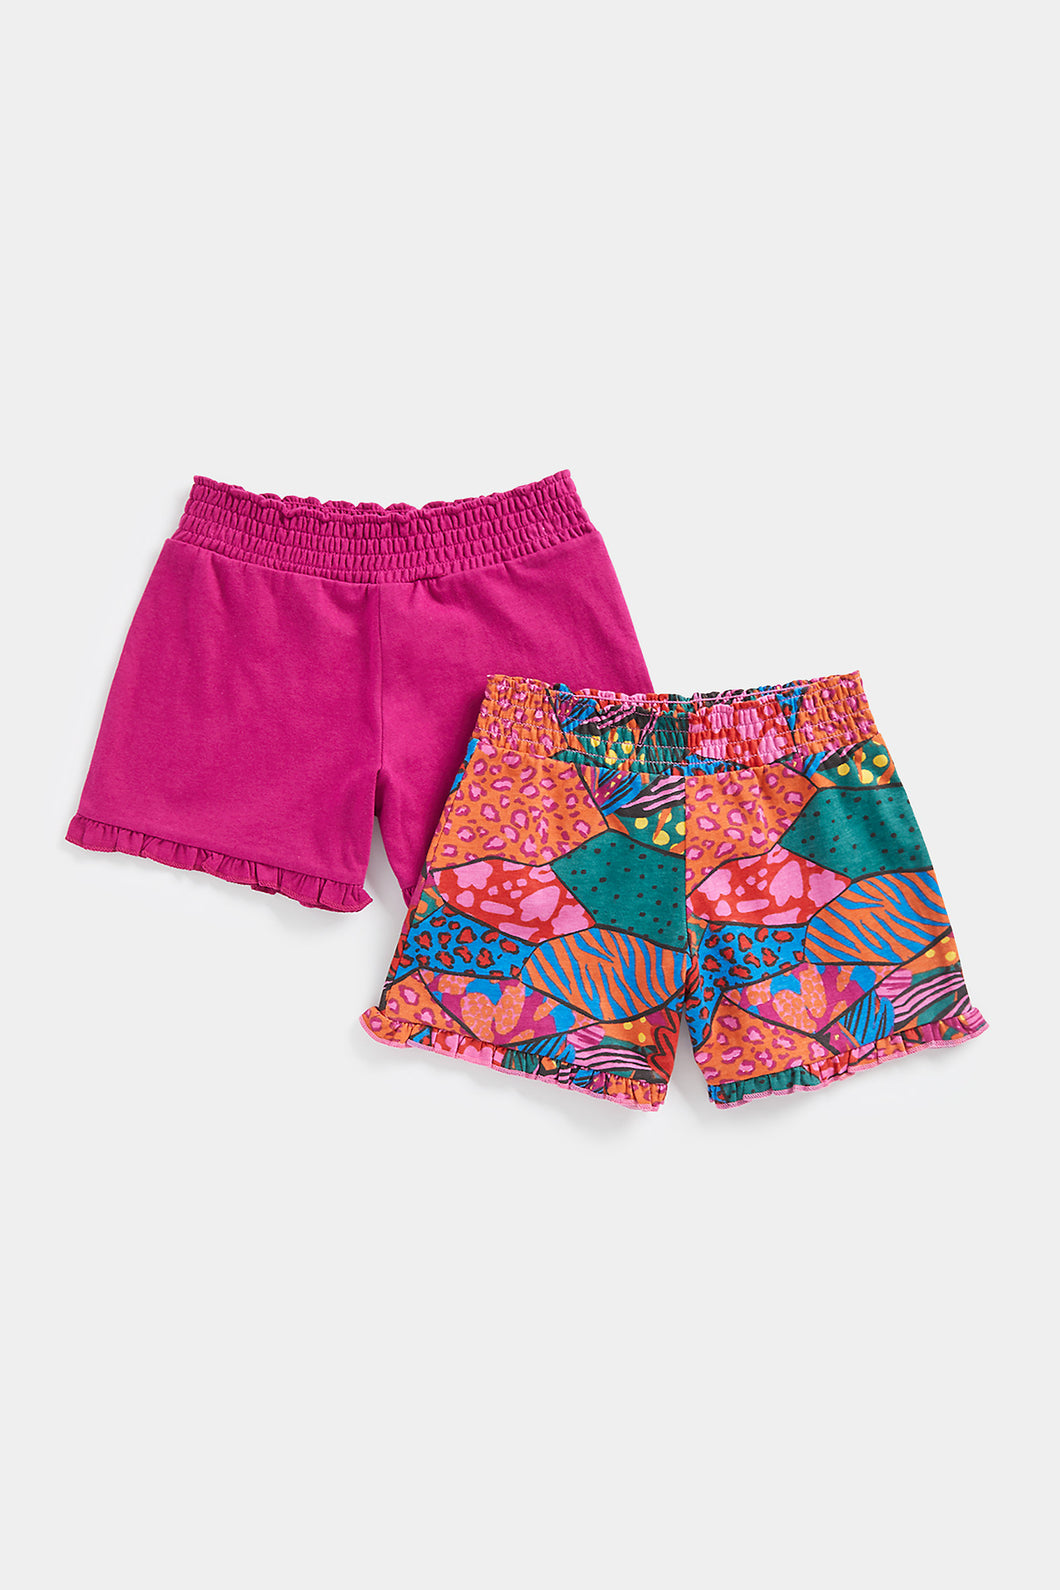 Mothercare Abstract Paradise Jersey Shorts - 2 Pack